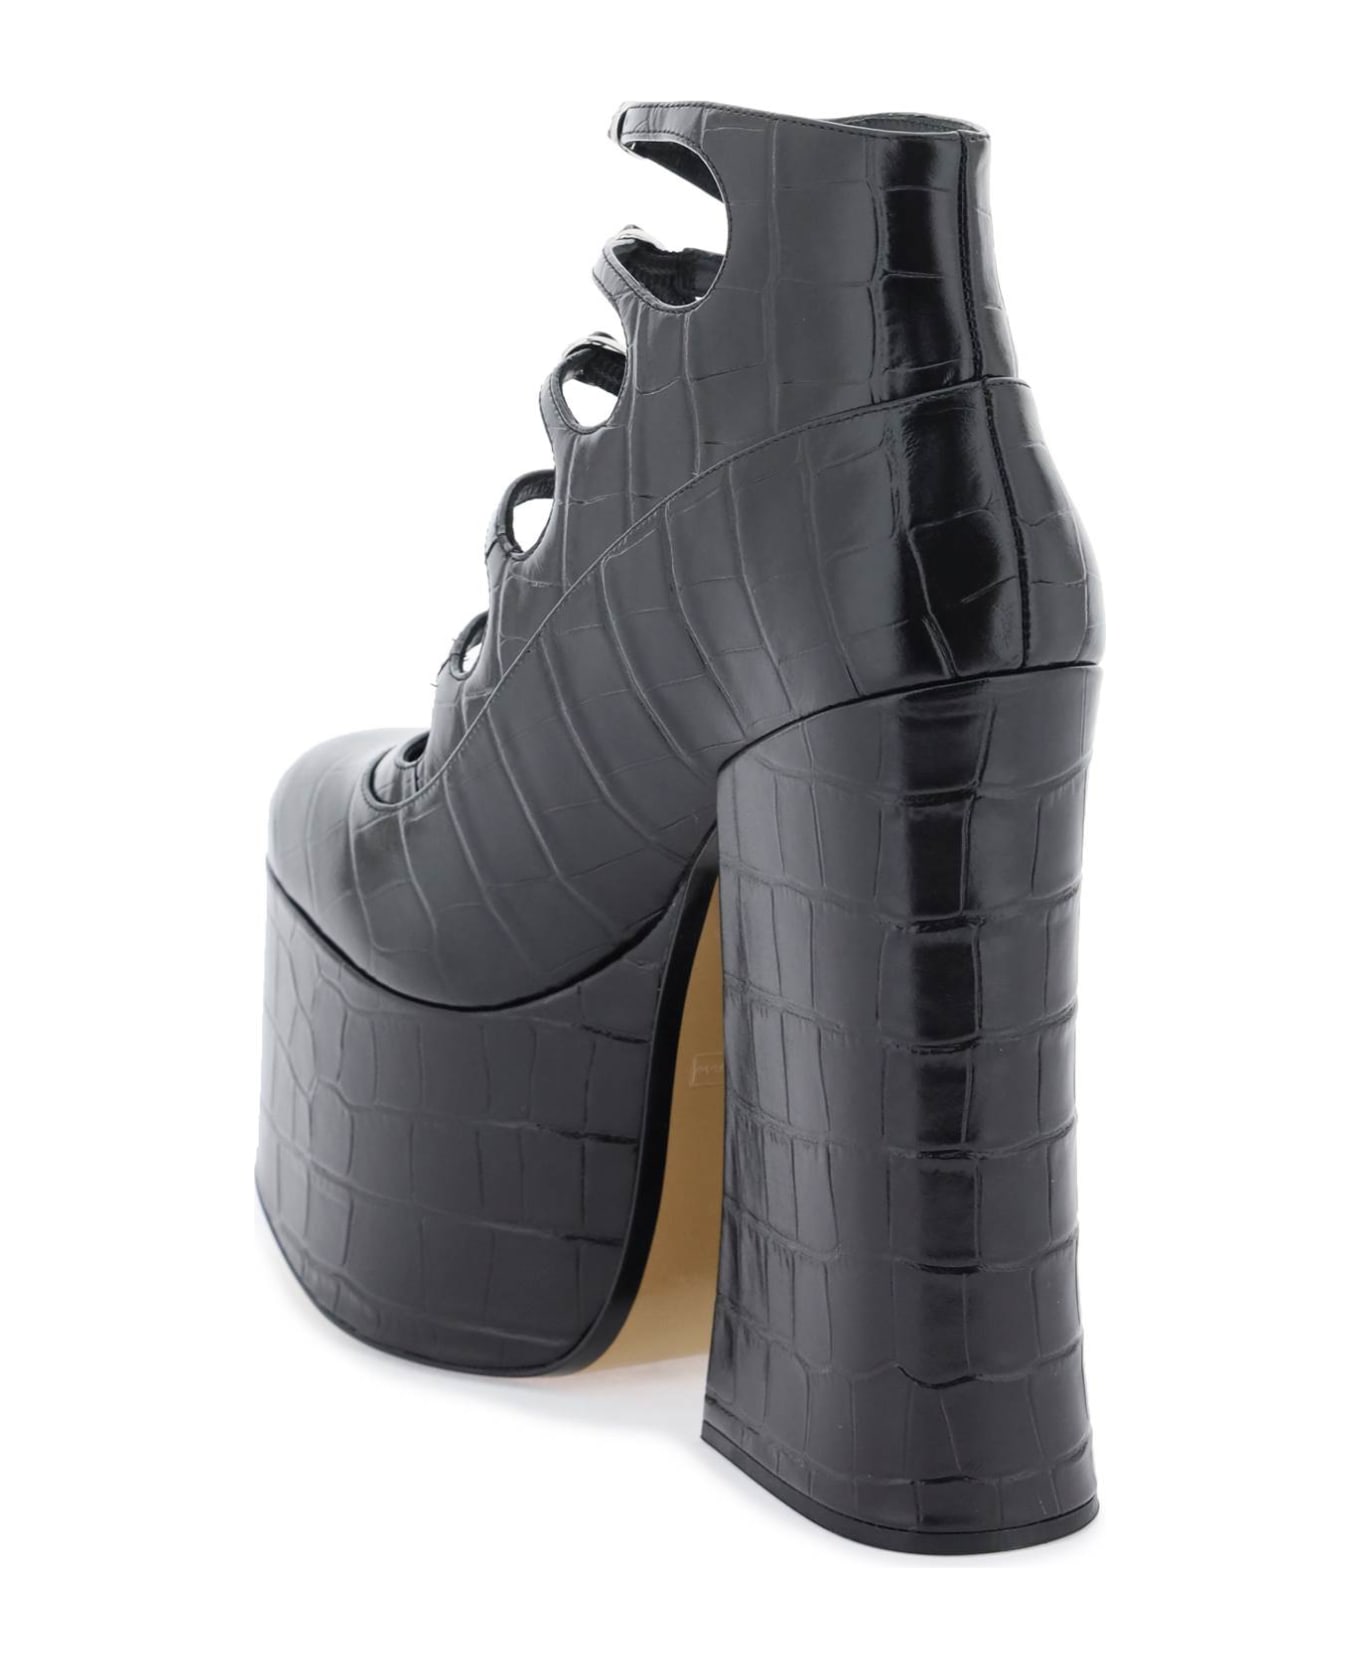 Marc Jacobs The Croc Embossed Kiki Ankle Boots - BLACK (Black) ブーツ